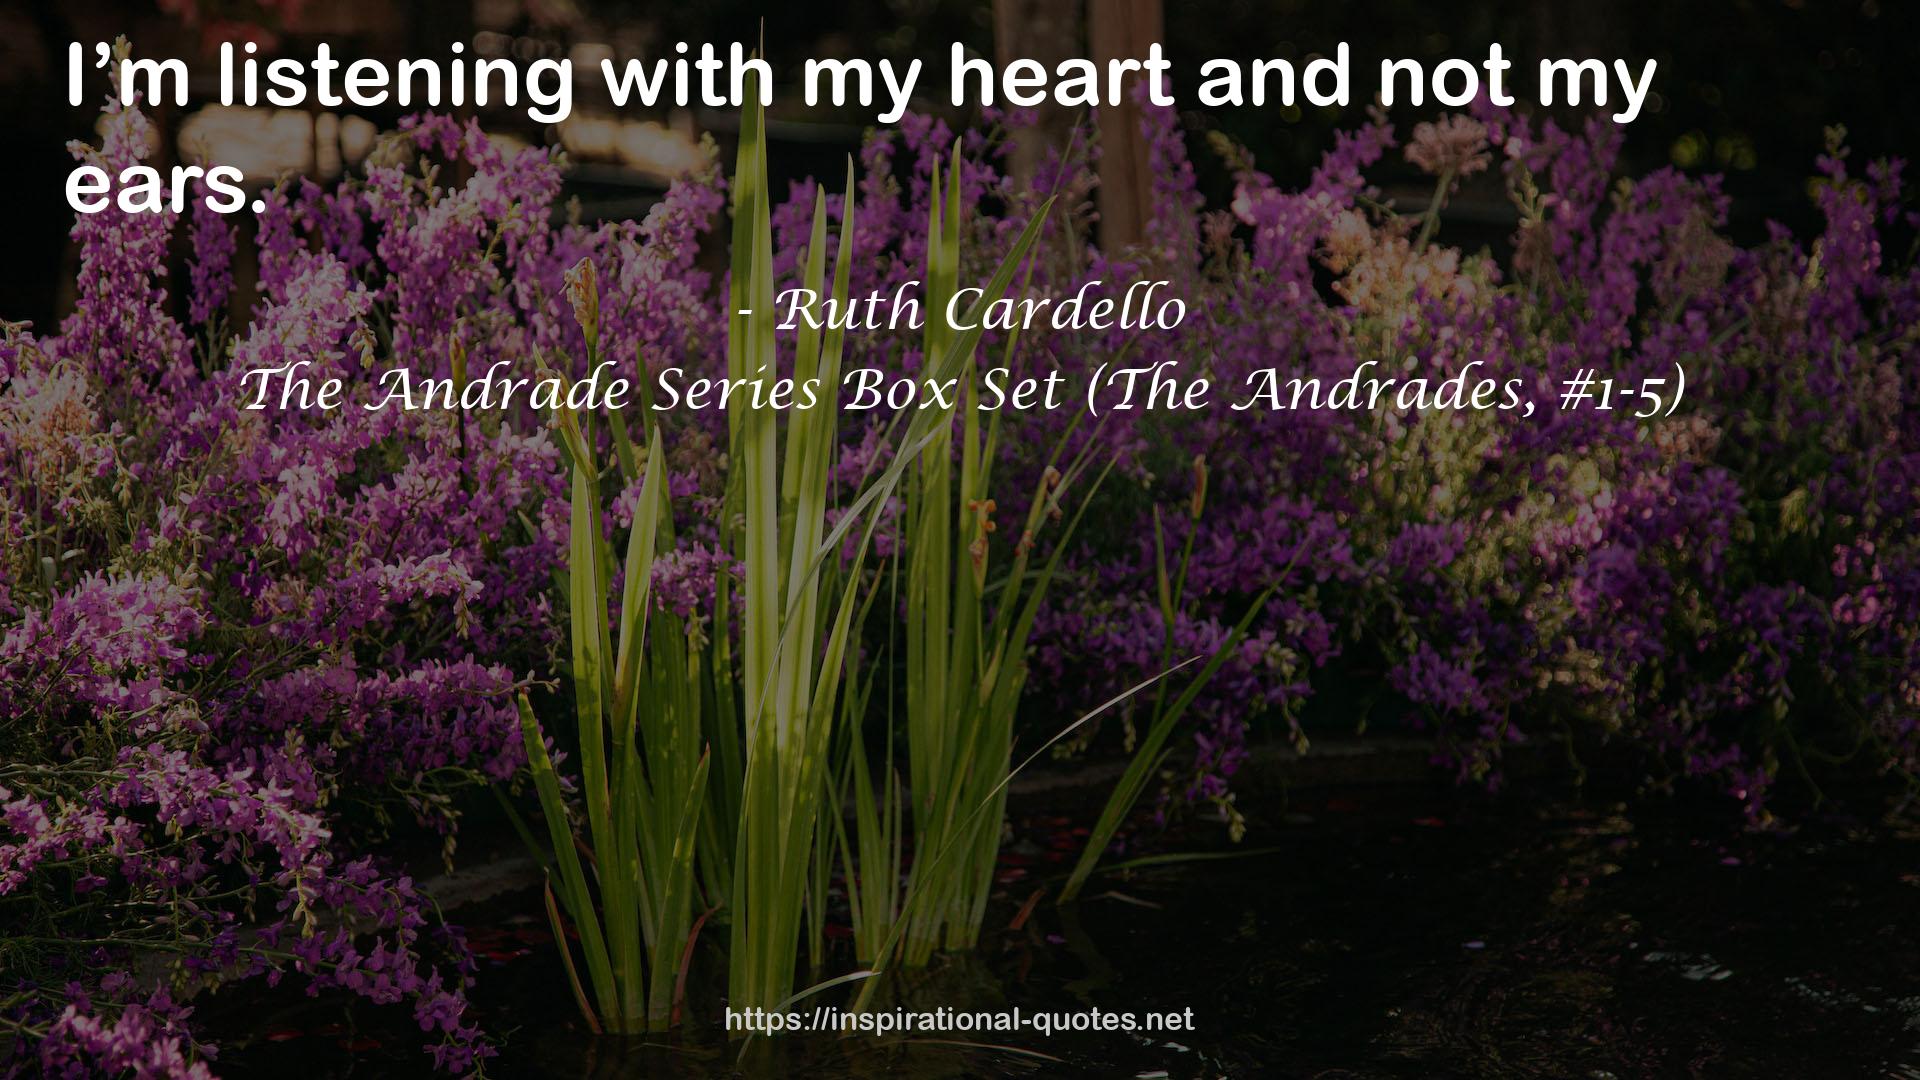 The Andrade Series Box Set (The Andrades, #1-5) QUOTES